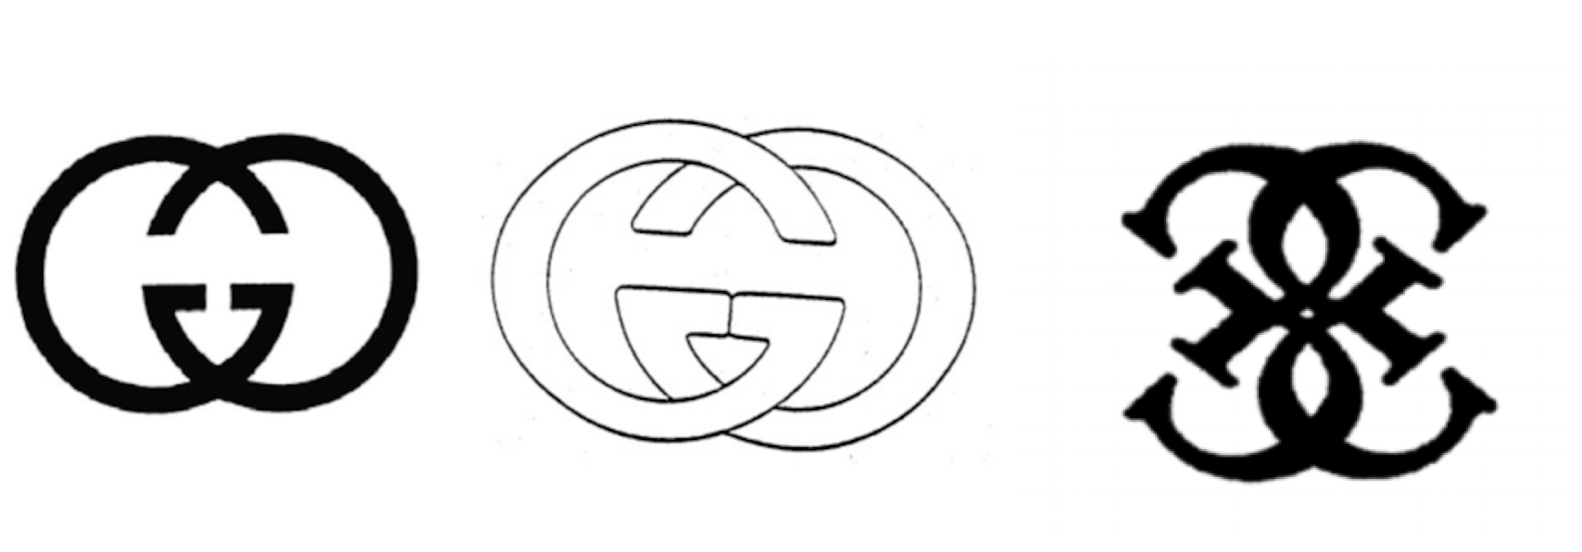  Gucci's logos (left and center) & Guess' logo (right) 